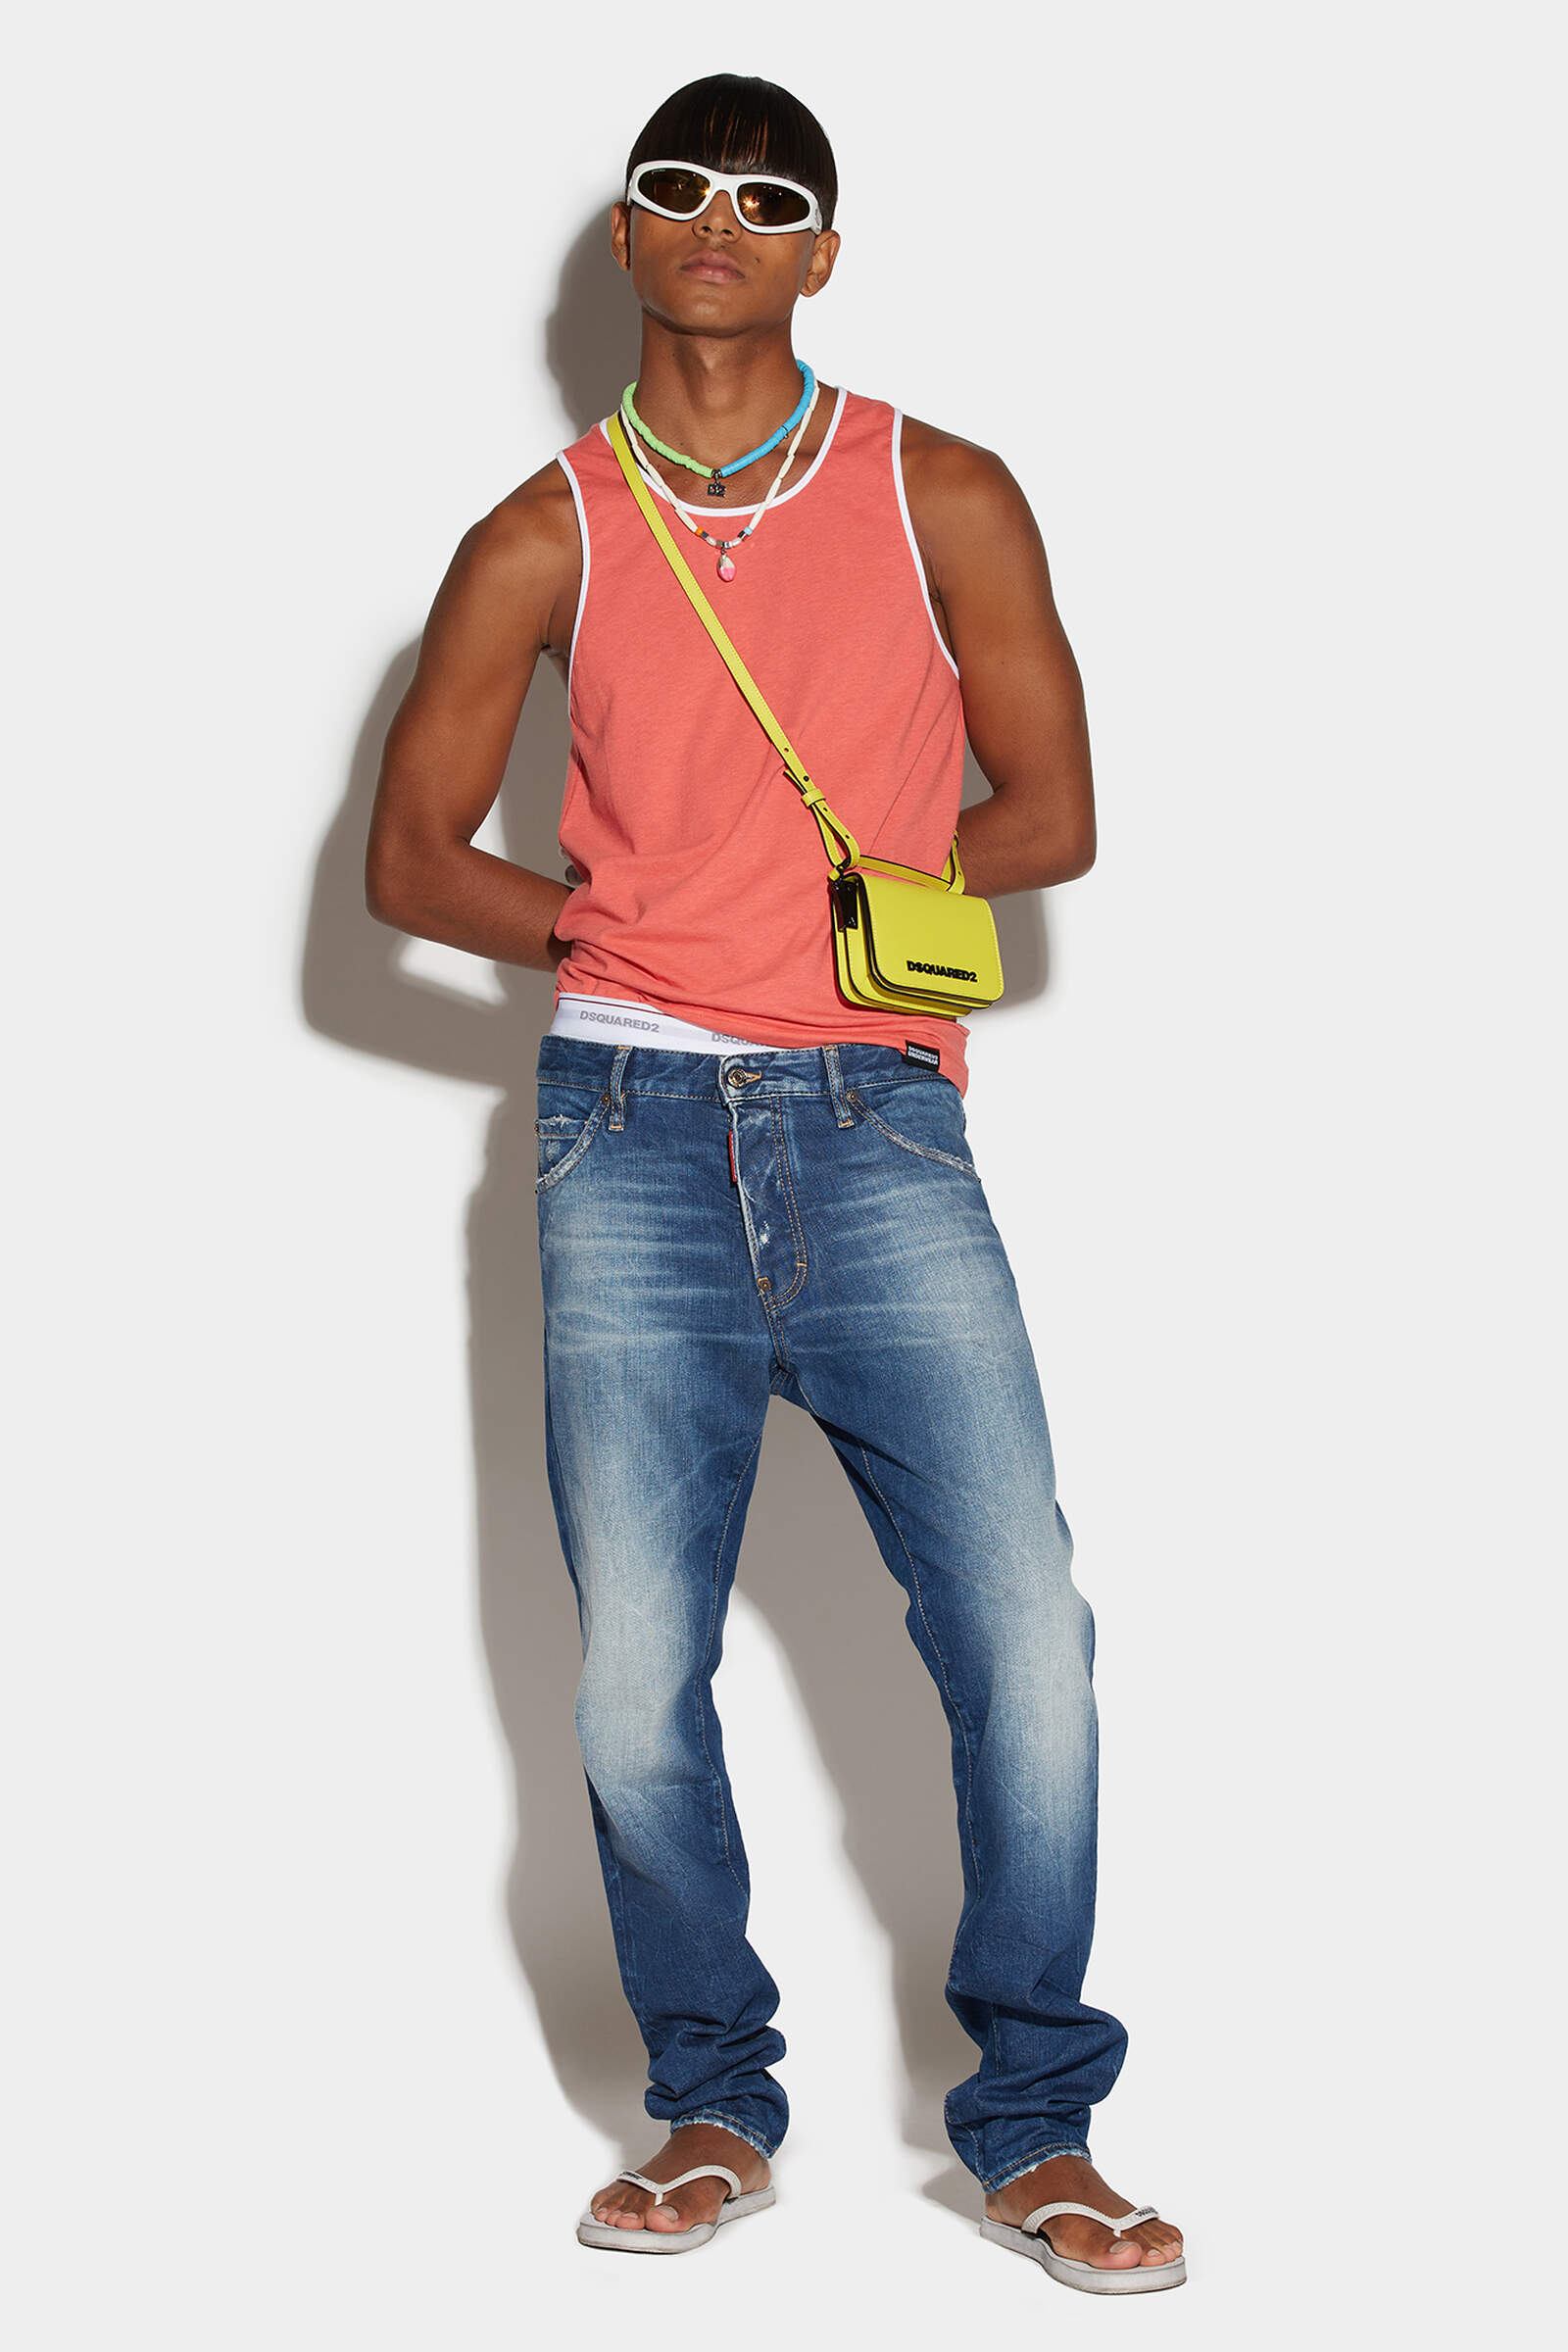 DSQUARED2 Jeans Cool Guy in Washed Blue 52